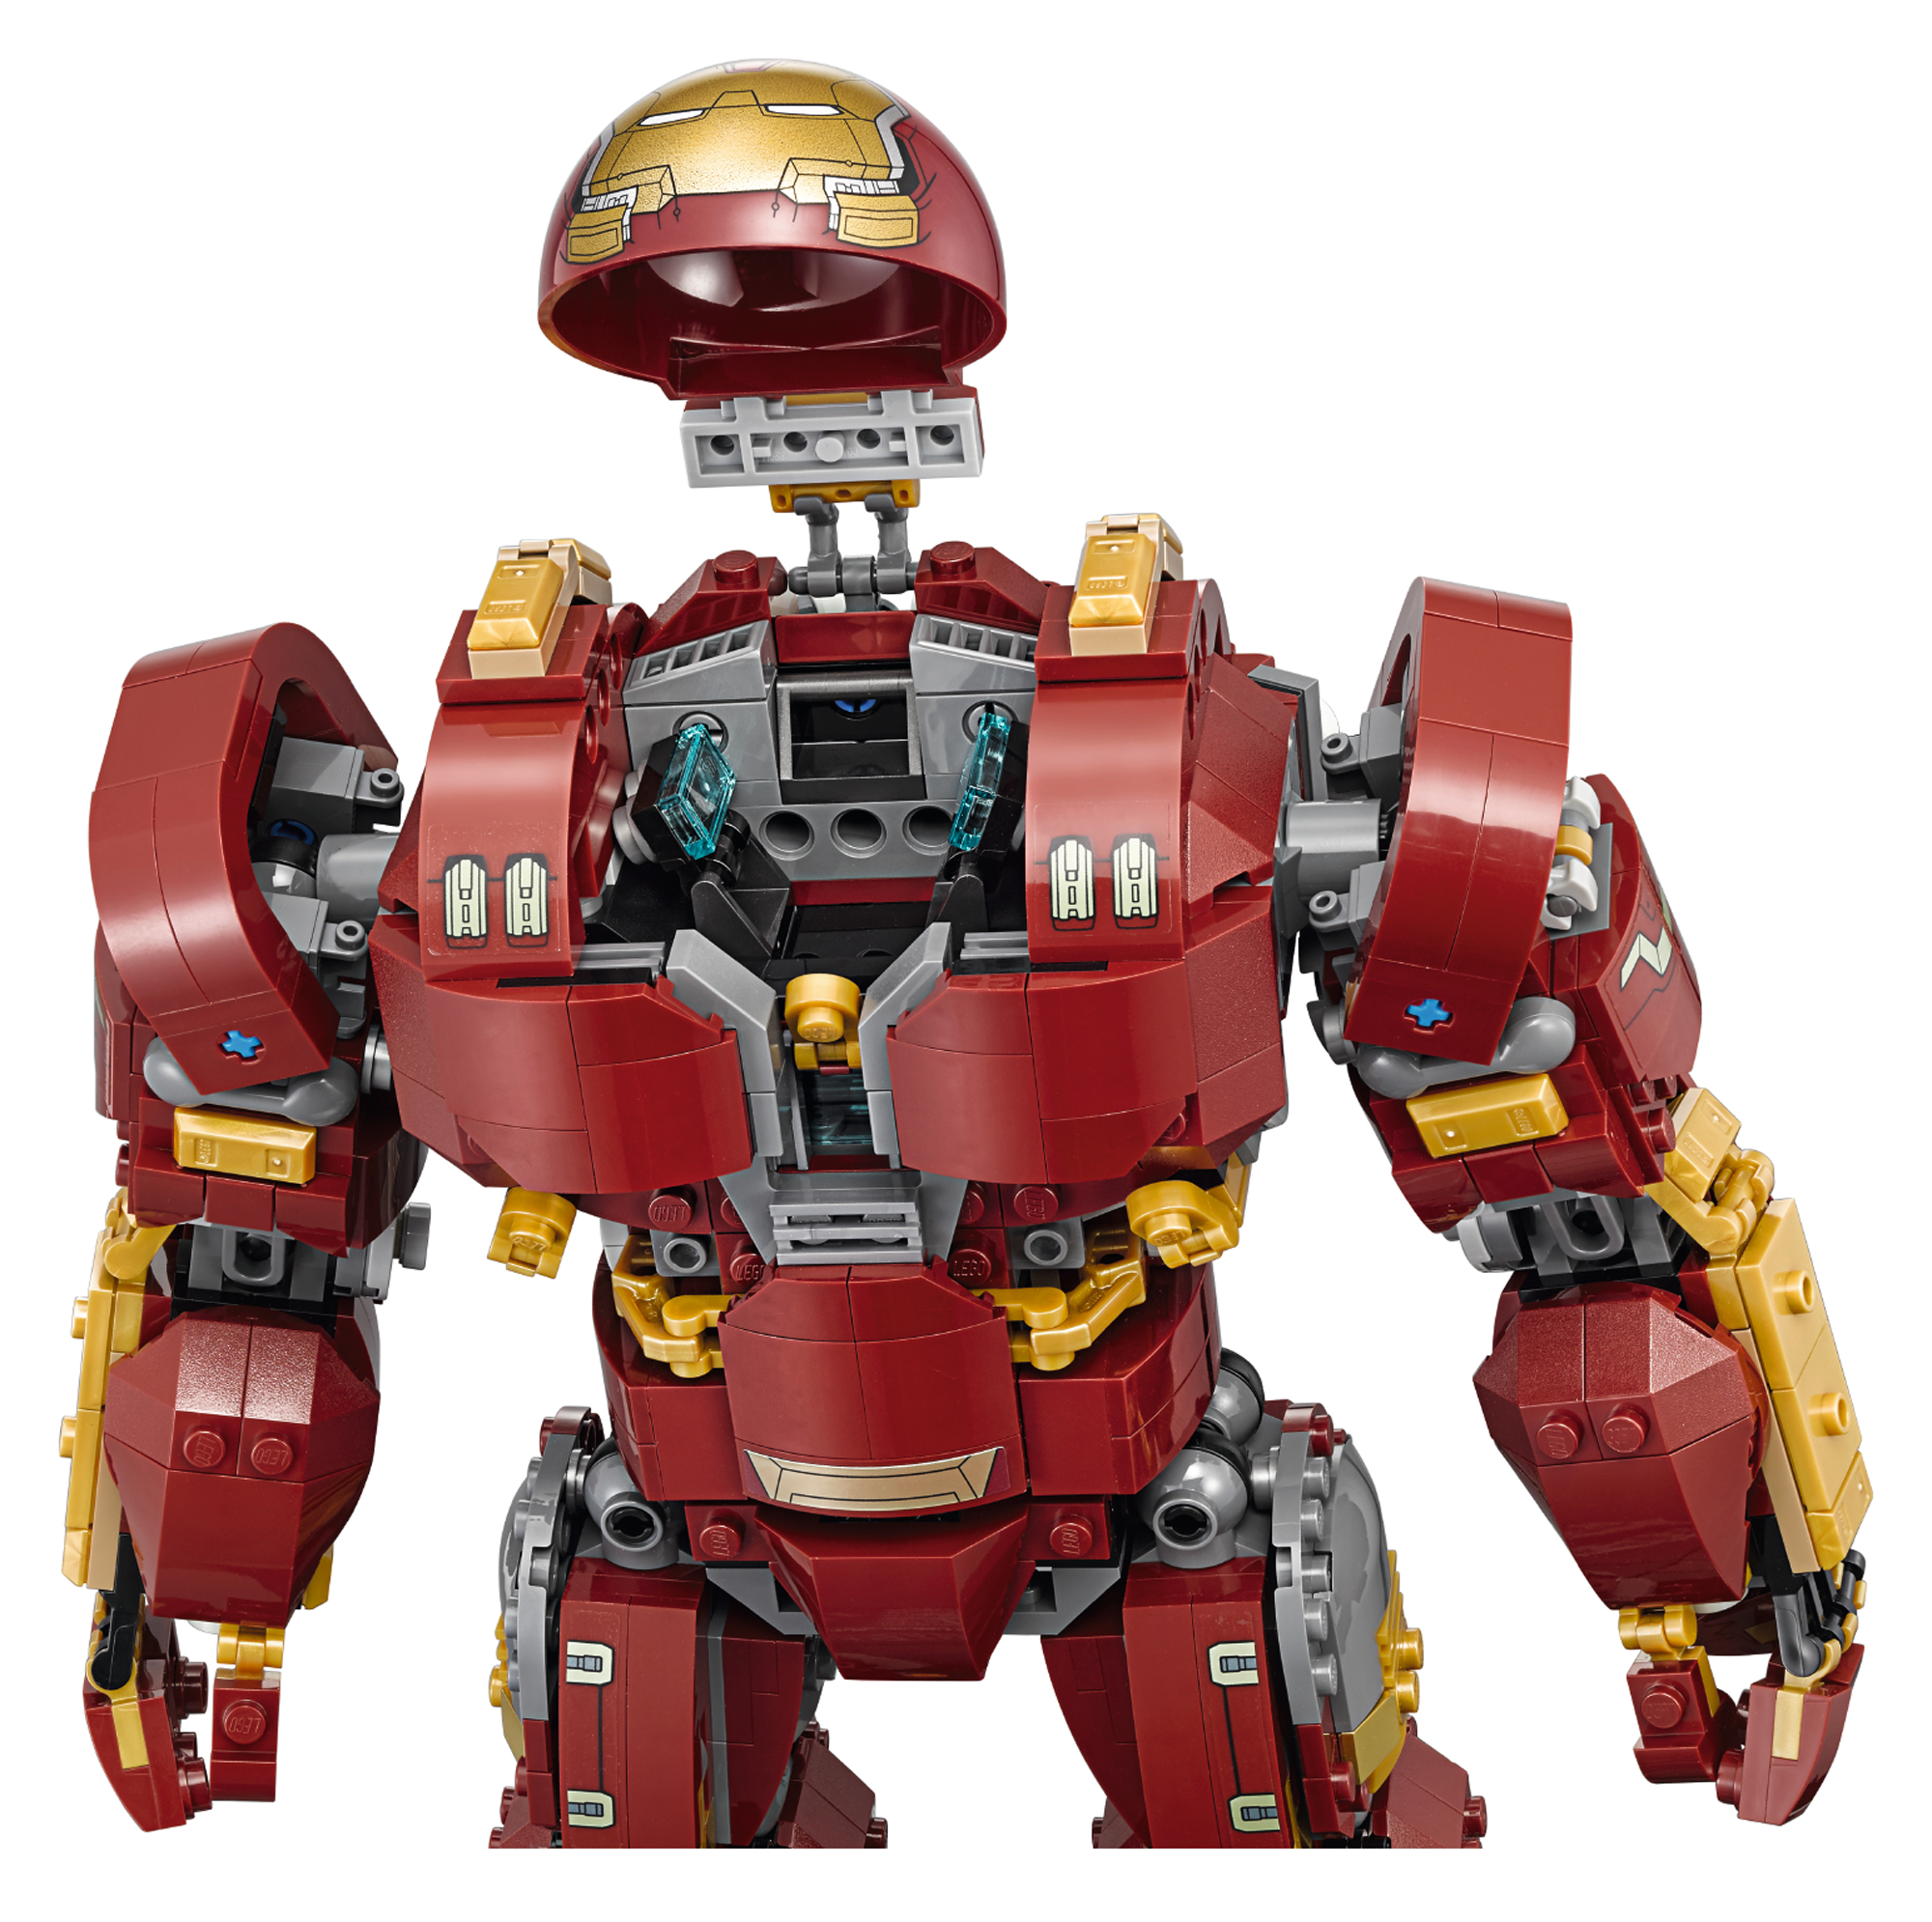 Iron Man's Hulkbuster Suit Is Getting The Giant Lego Set It Deserves